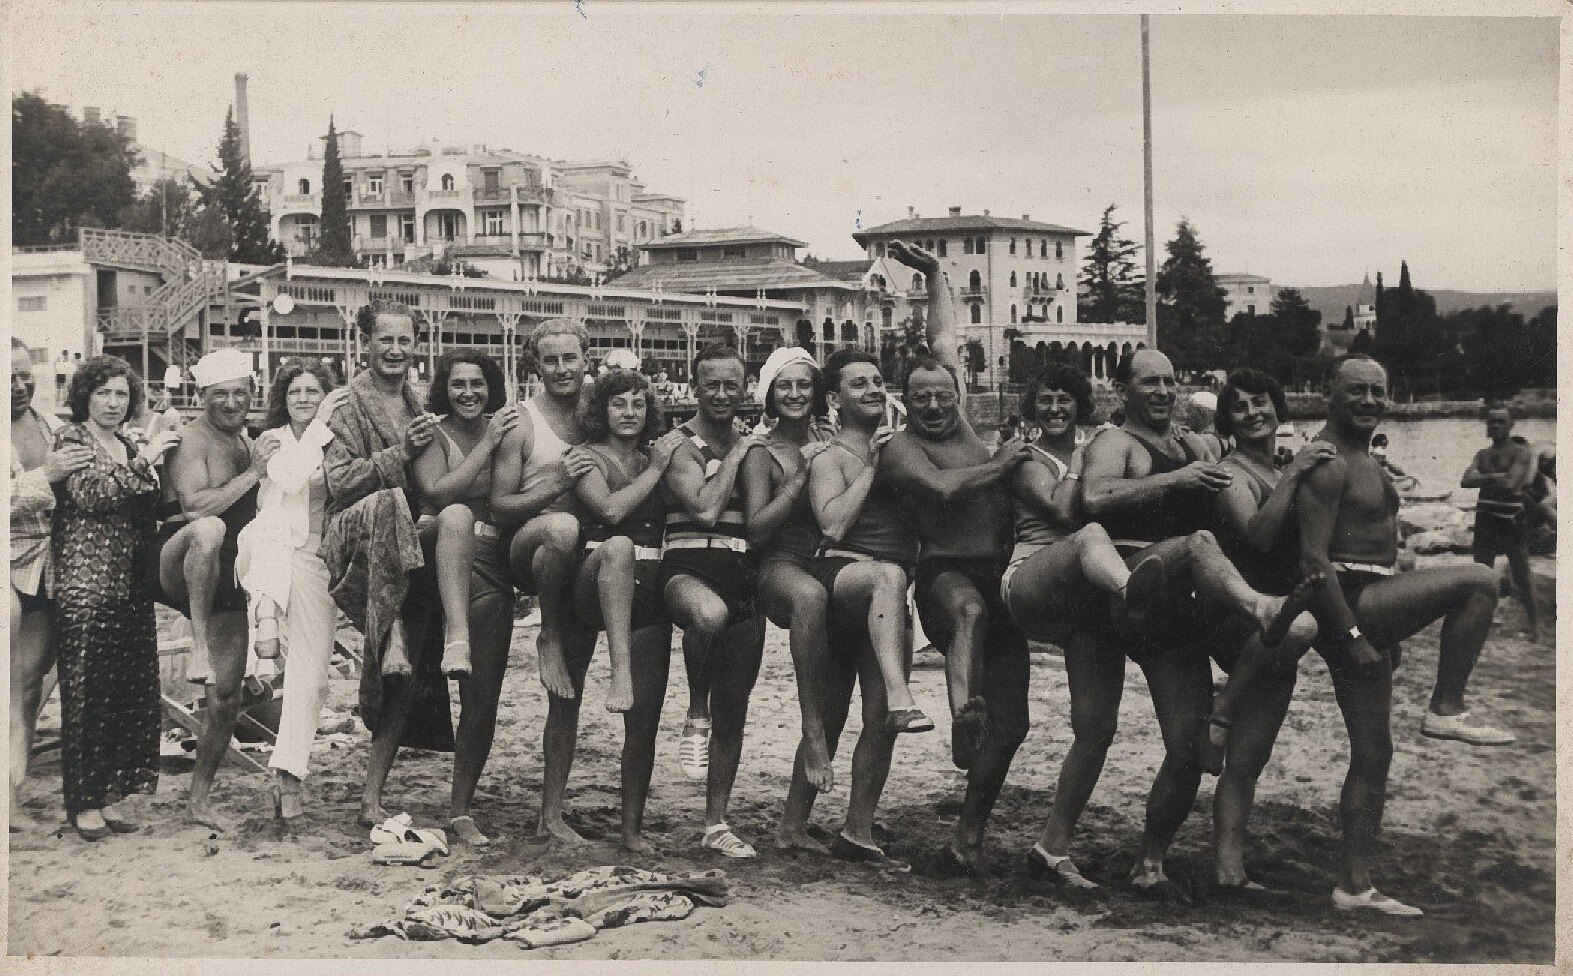 a photo taken in the early 1900s of a conga line assembled by beachgoers at an oceanside resort